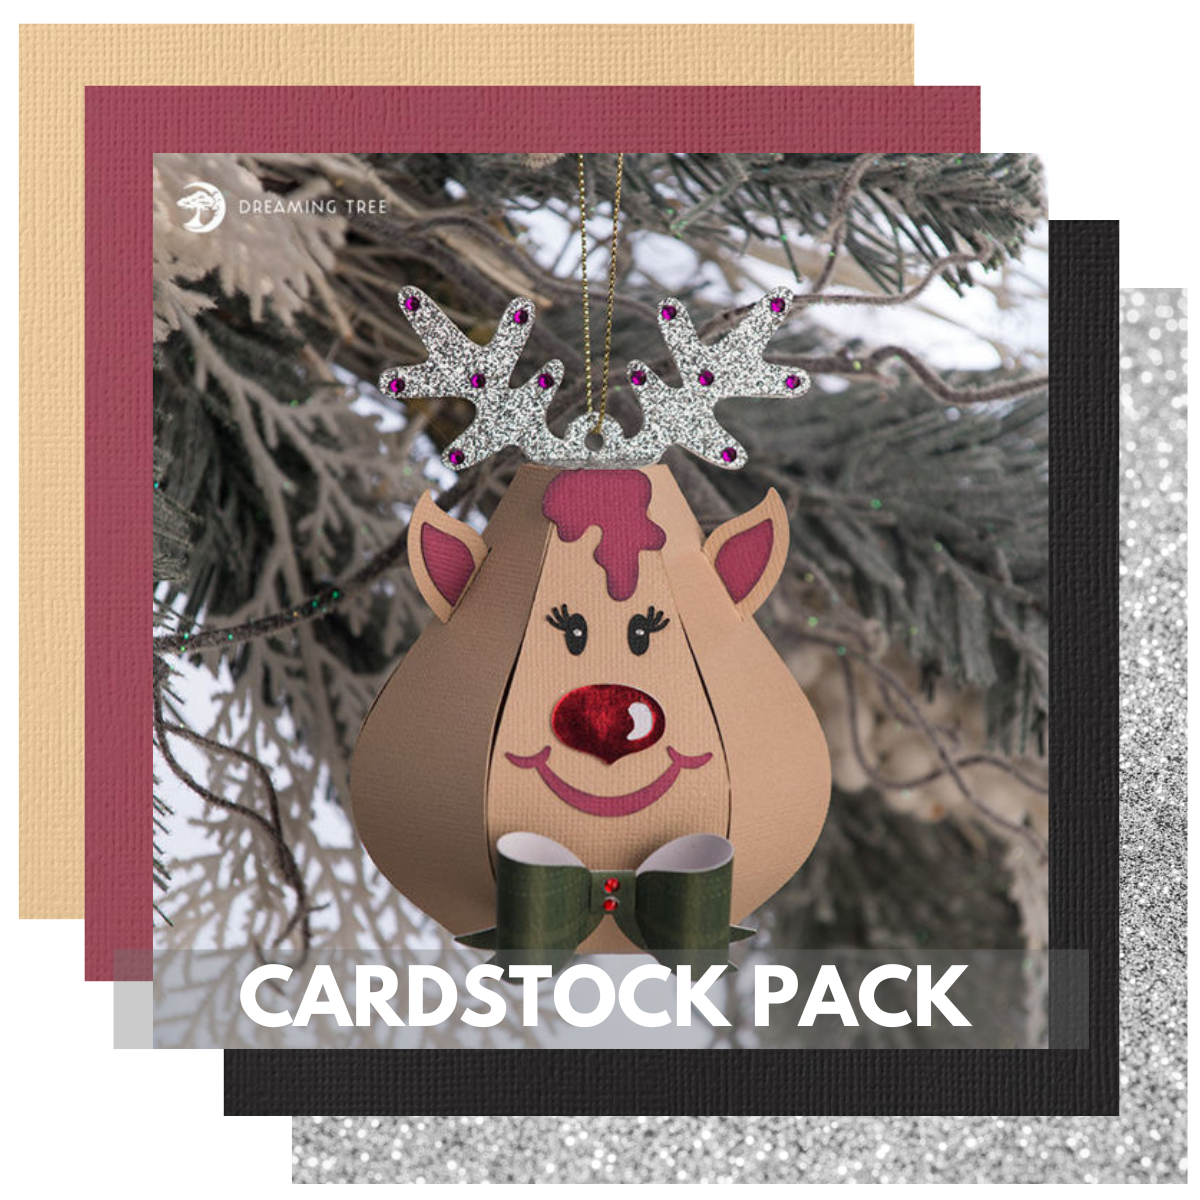 DREAMING TREE RUDOLPH ORNAMENT KIT - 8 Sheets - 12x12 Cardstock Shop